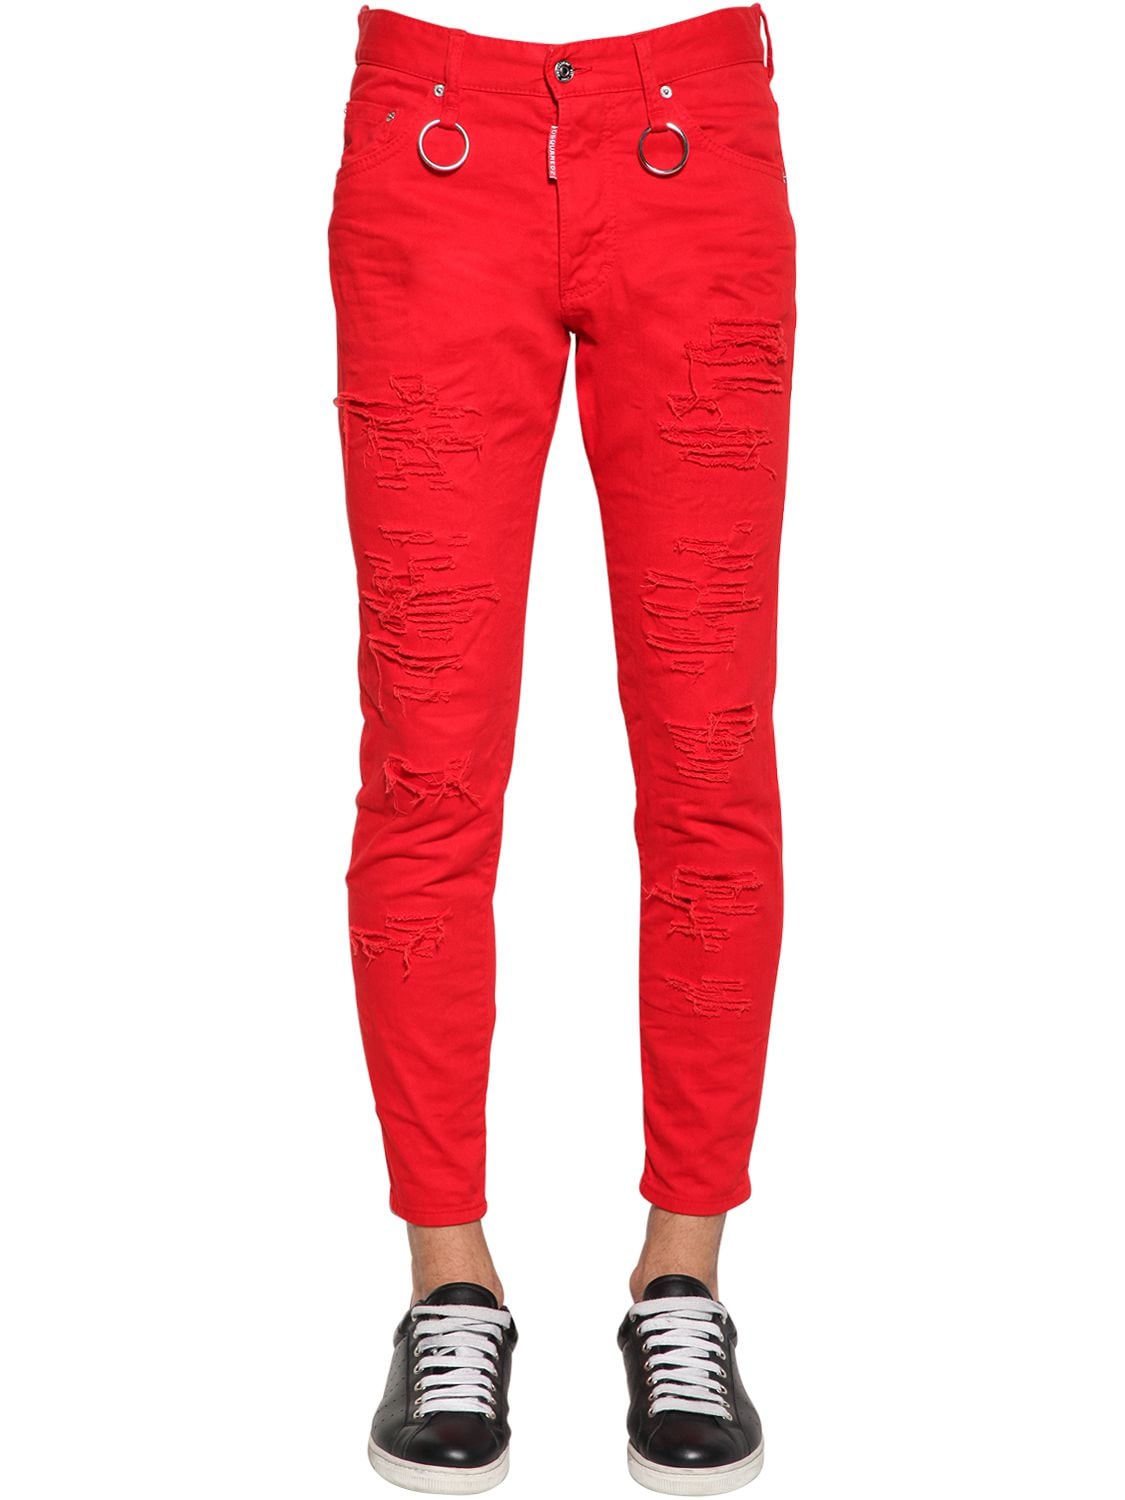 red cotton jeans